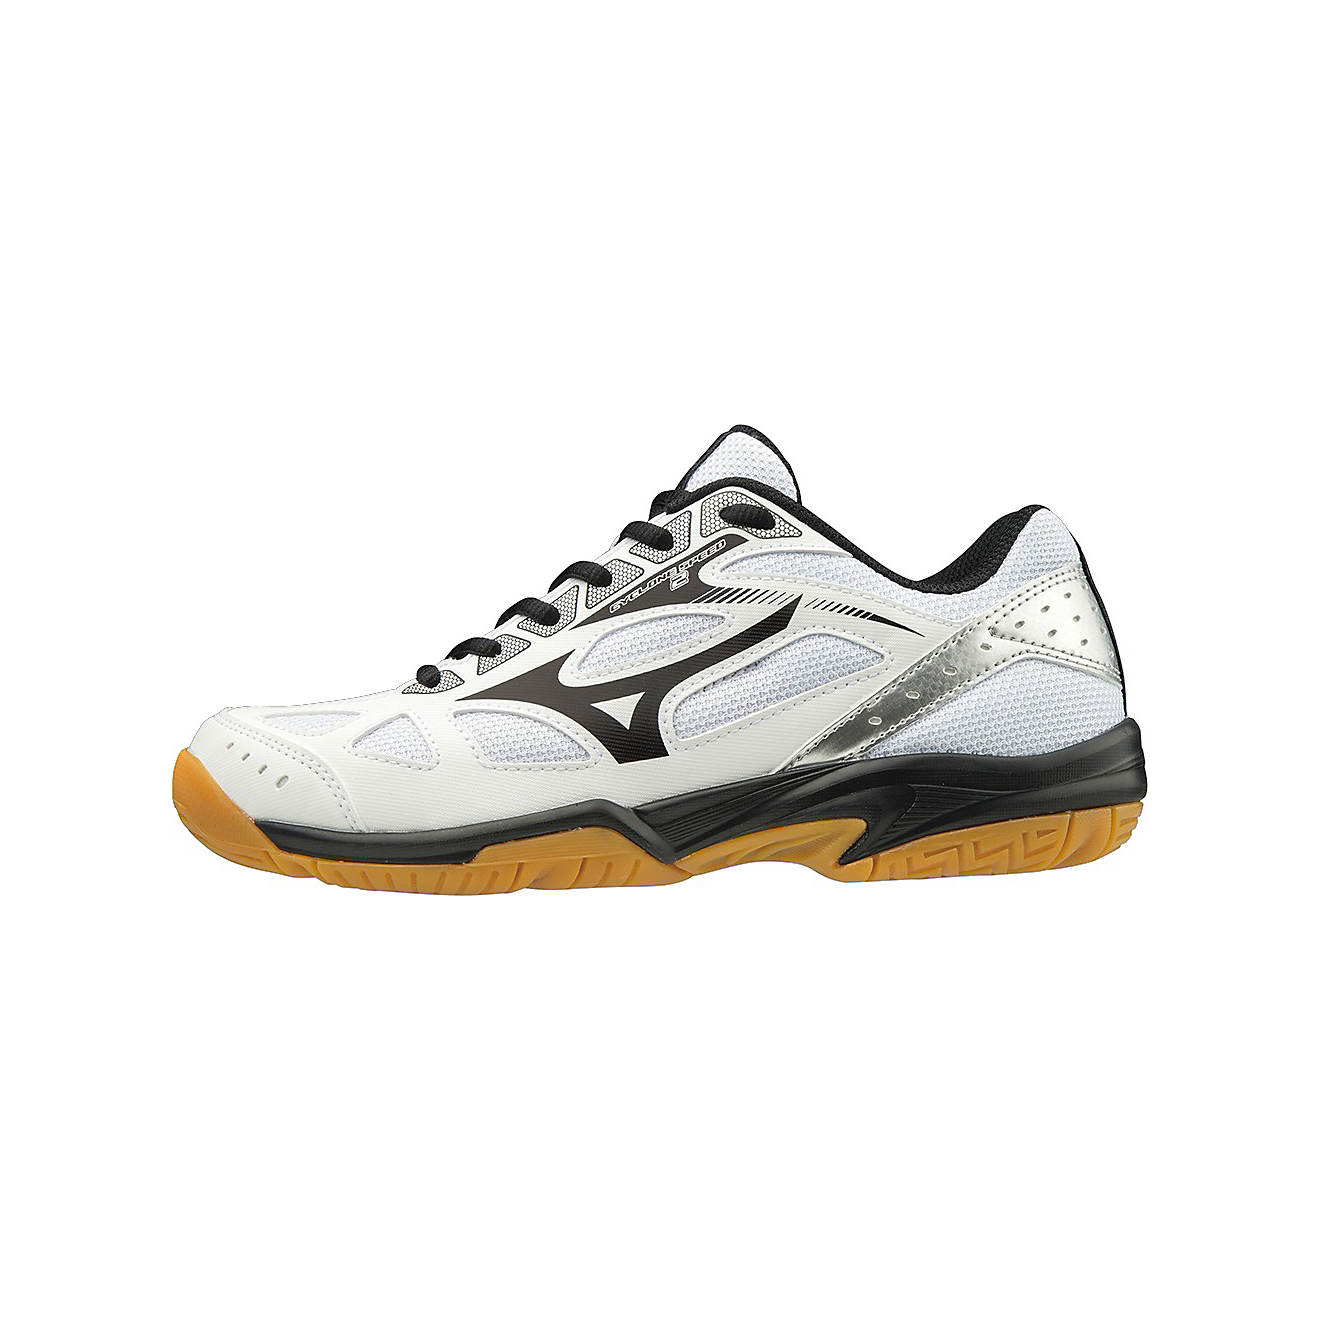 New Mizuno Women's Volleyball Shoes CYCLONE SPEED 2 MID V1GC1985 52 Black x Gold